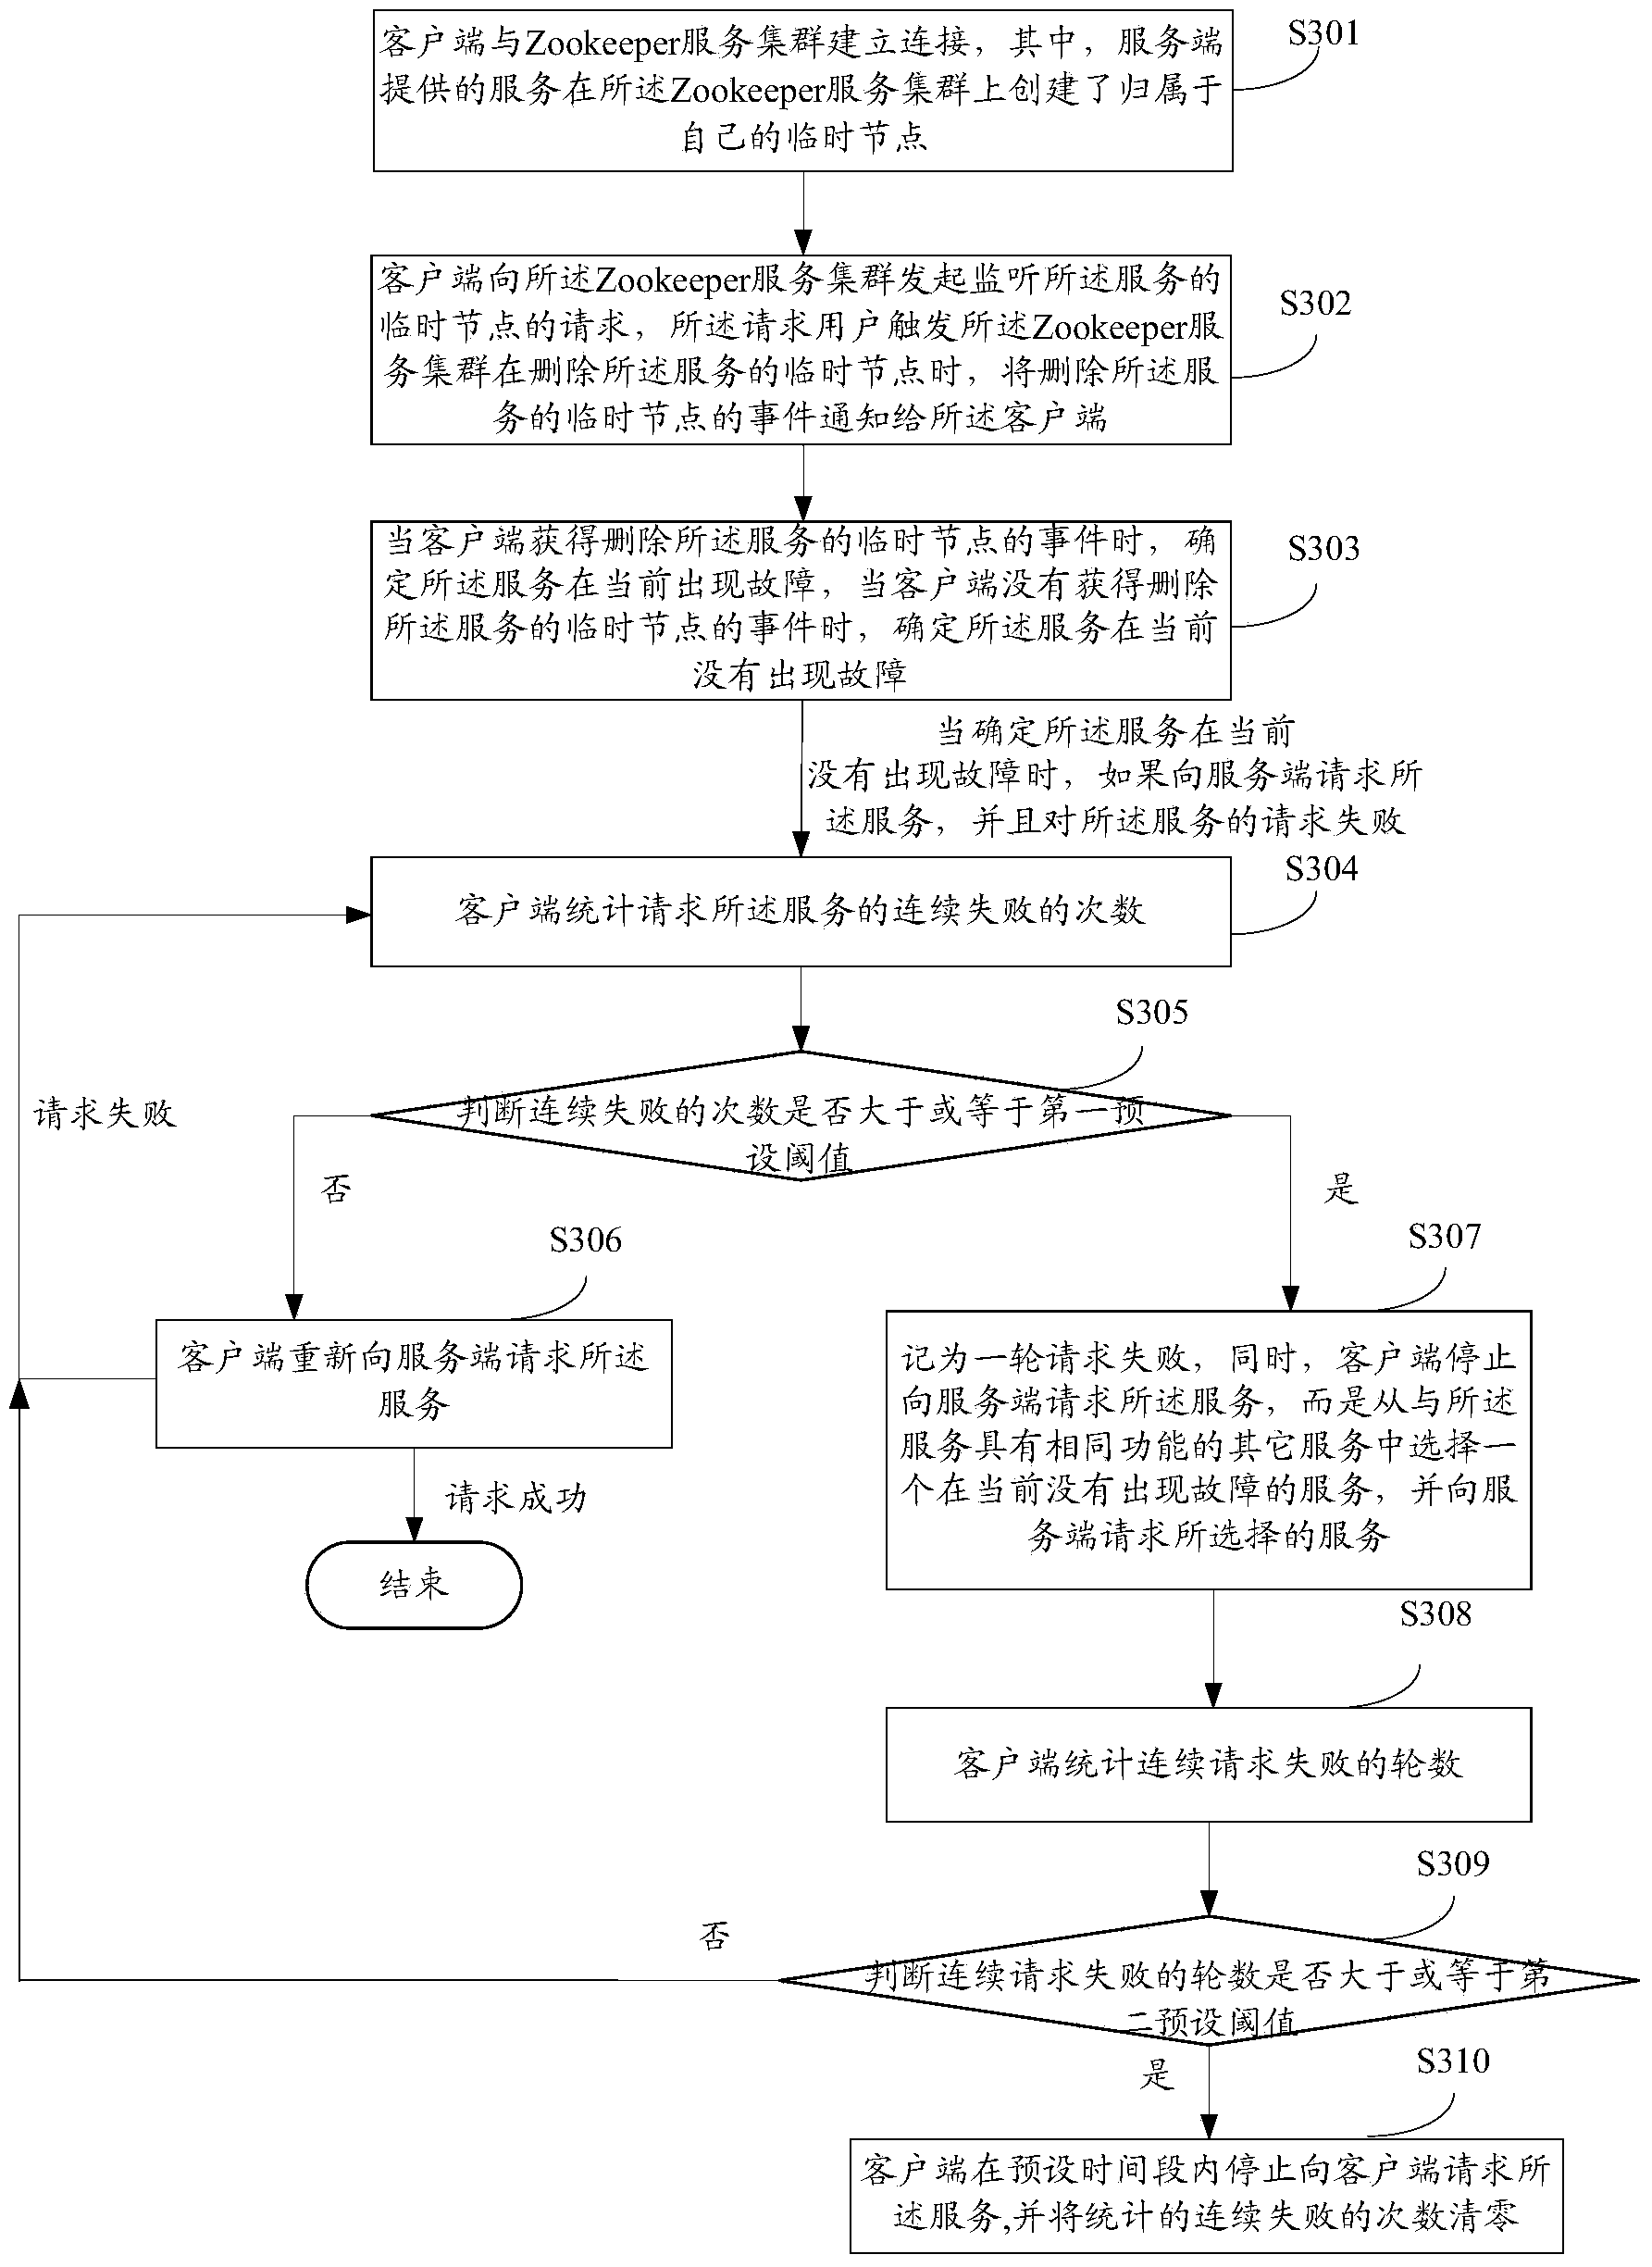 Method and apparatus for performing failure checking on service of remote method invocation